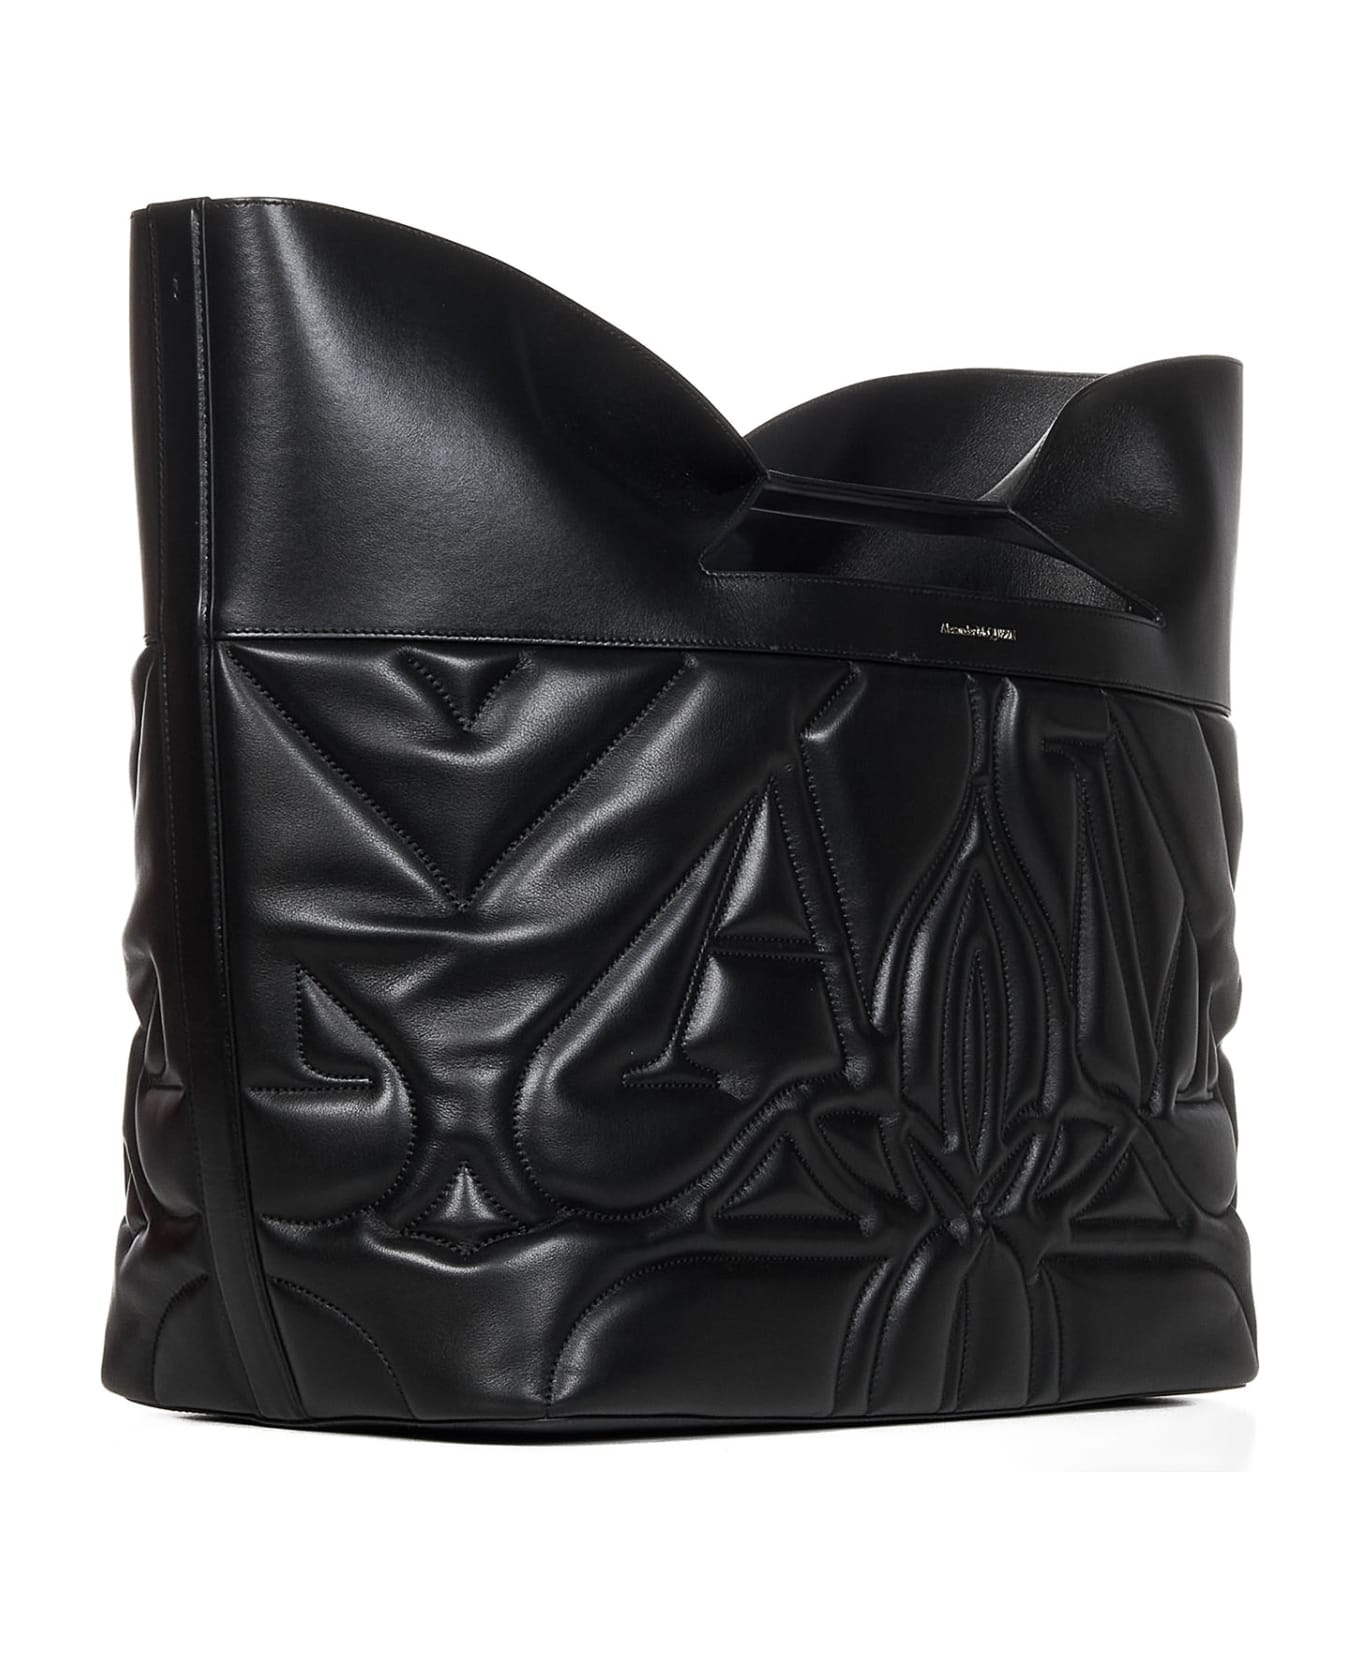 Alexander McQueen The Bow Tote - Black トートバッグ